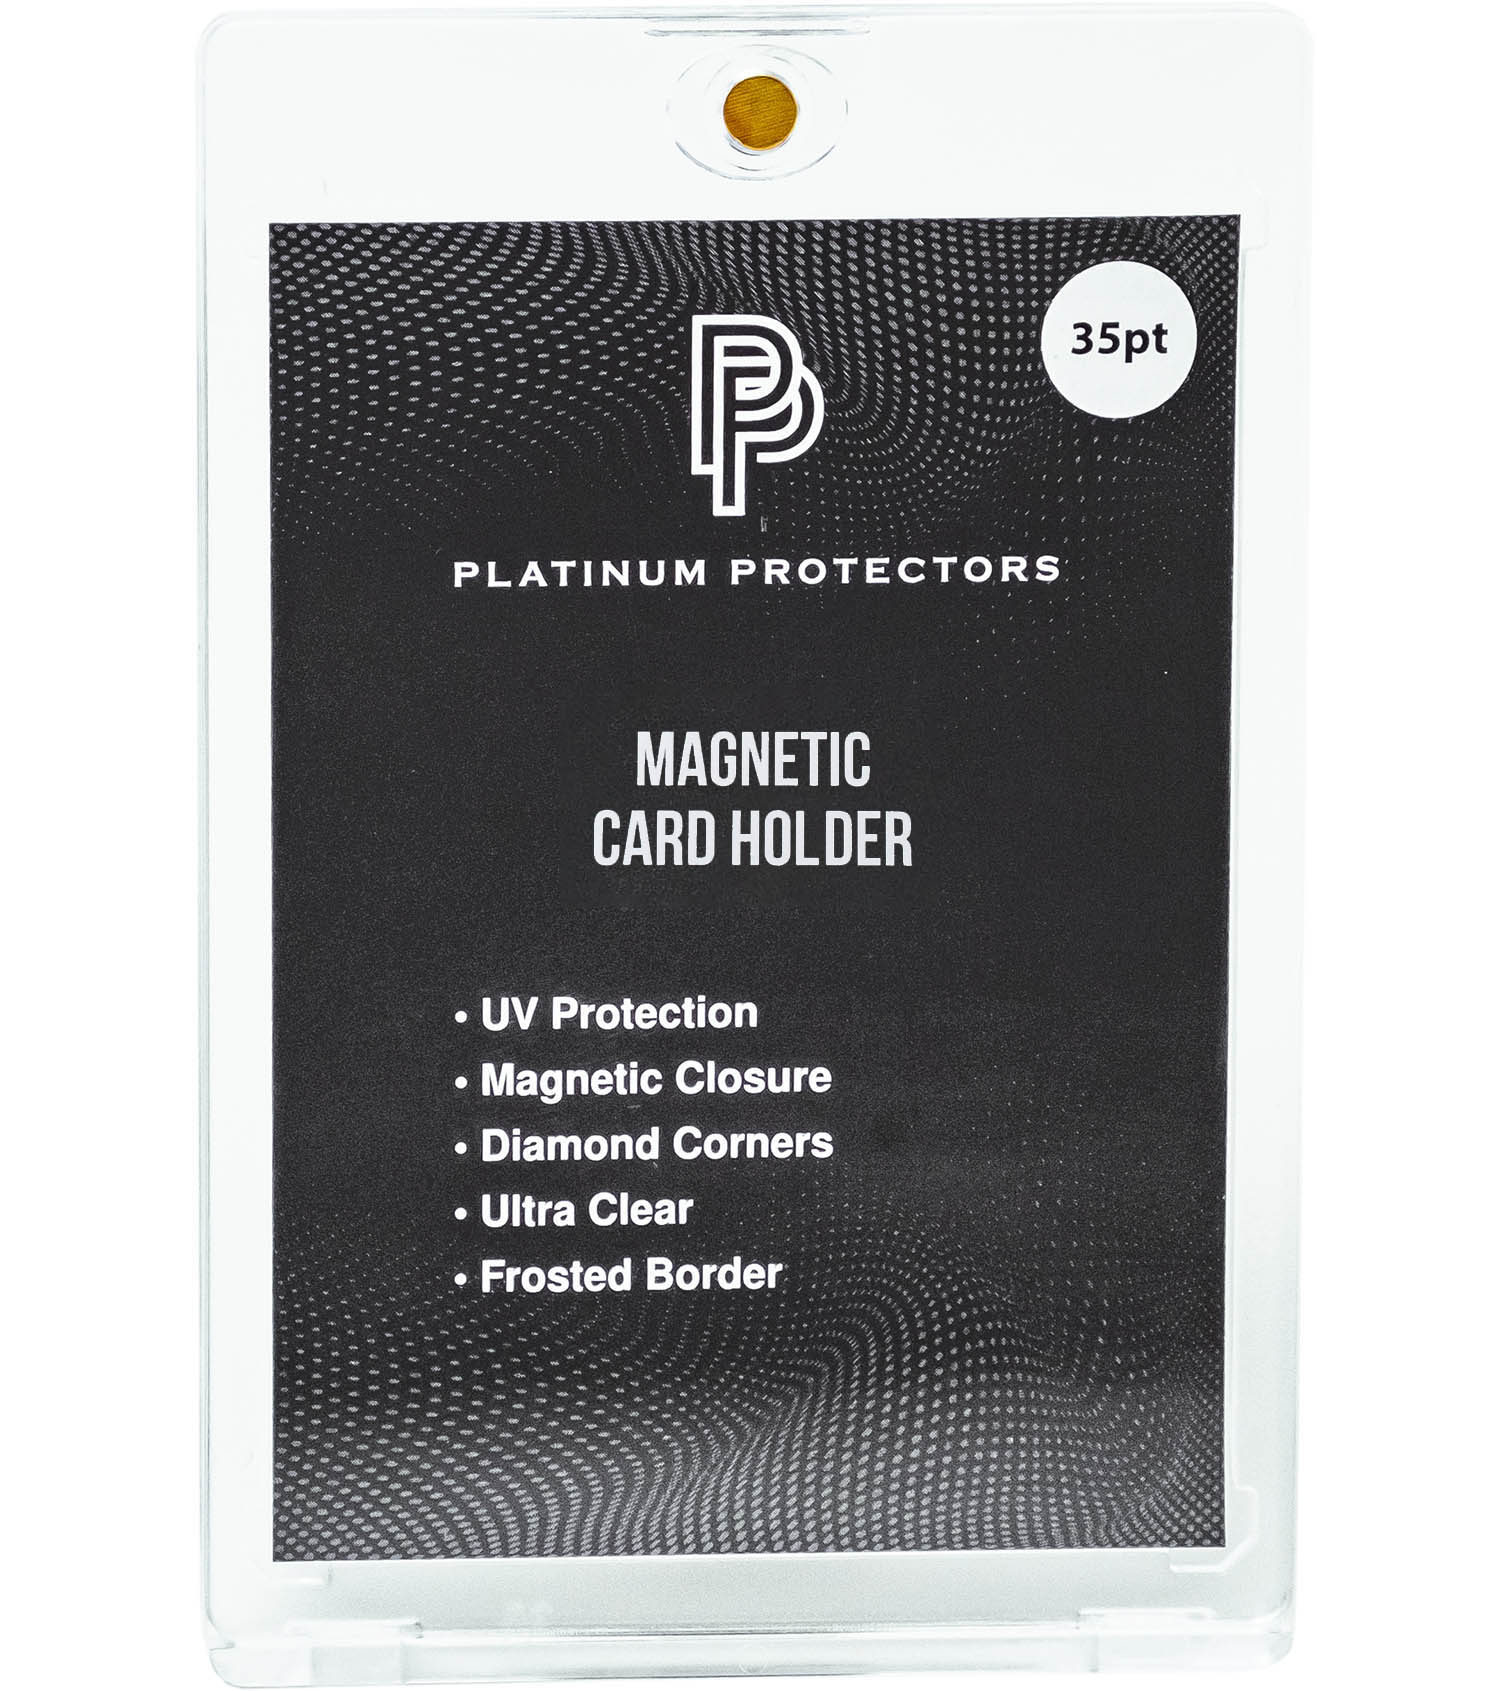 Platinum Protectors Magnetic Card Holders for Trading Cards - 35 pt